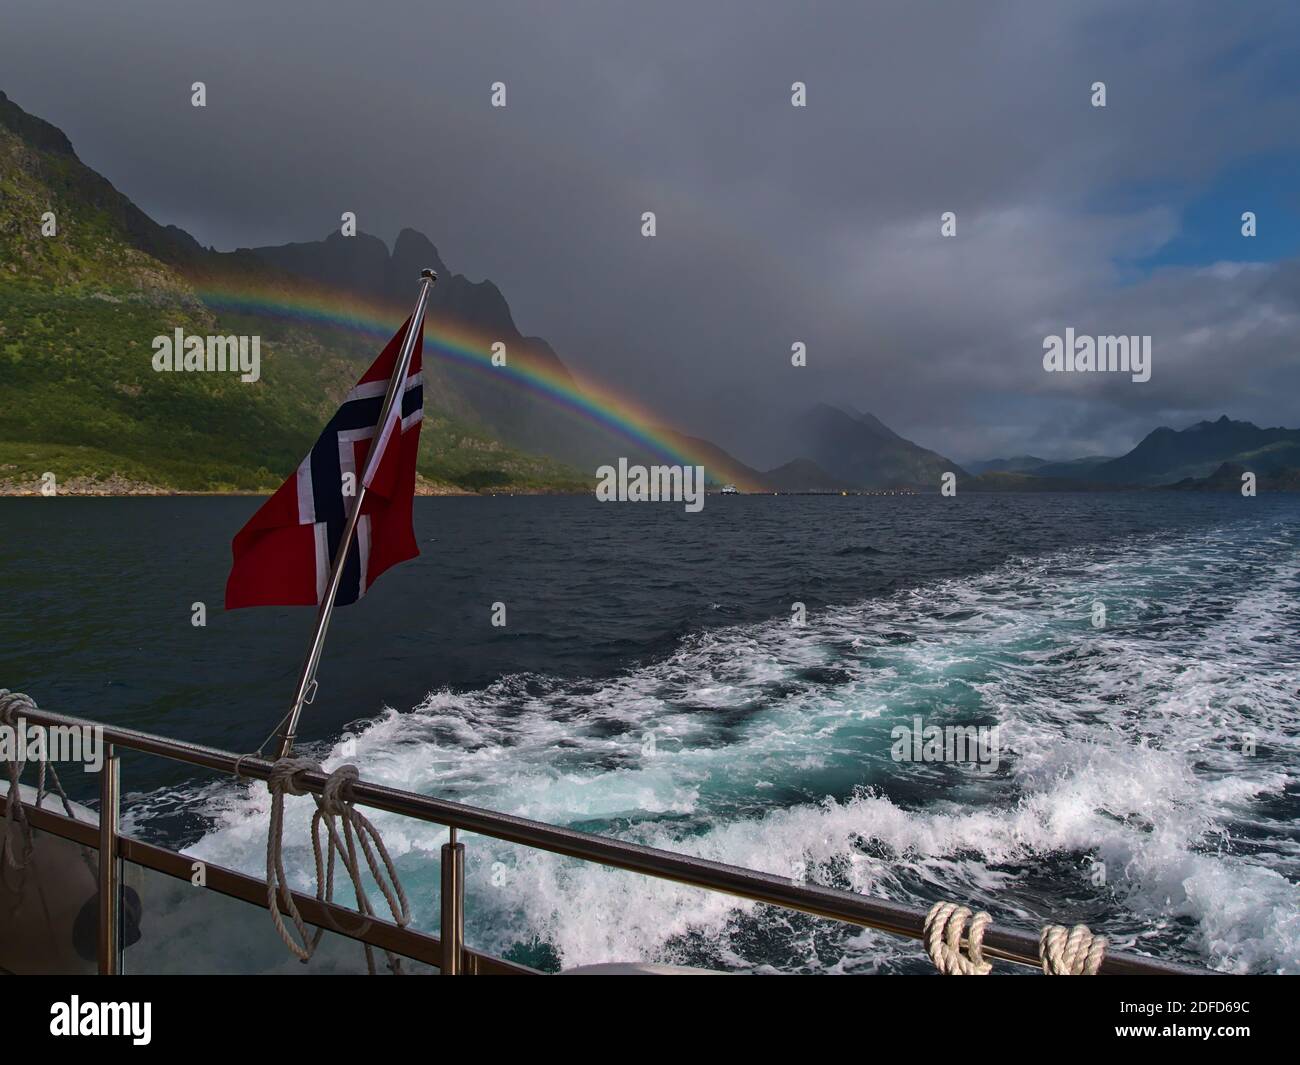 Norwegian national flag flying in the wind on the stern of tourist boat with majestic colorful rainbow above mountains on the rocky coast of Norway. Stock Photo